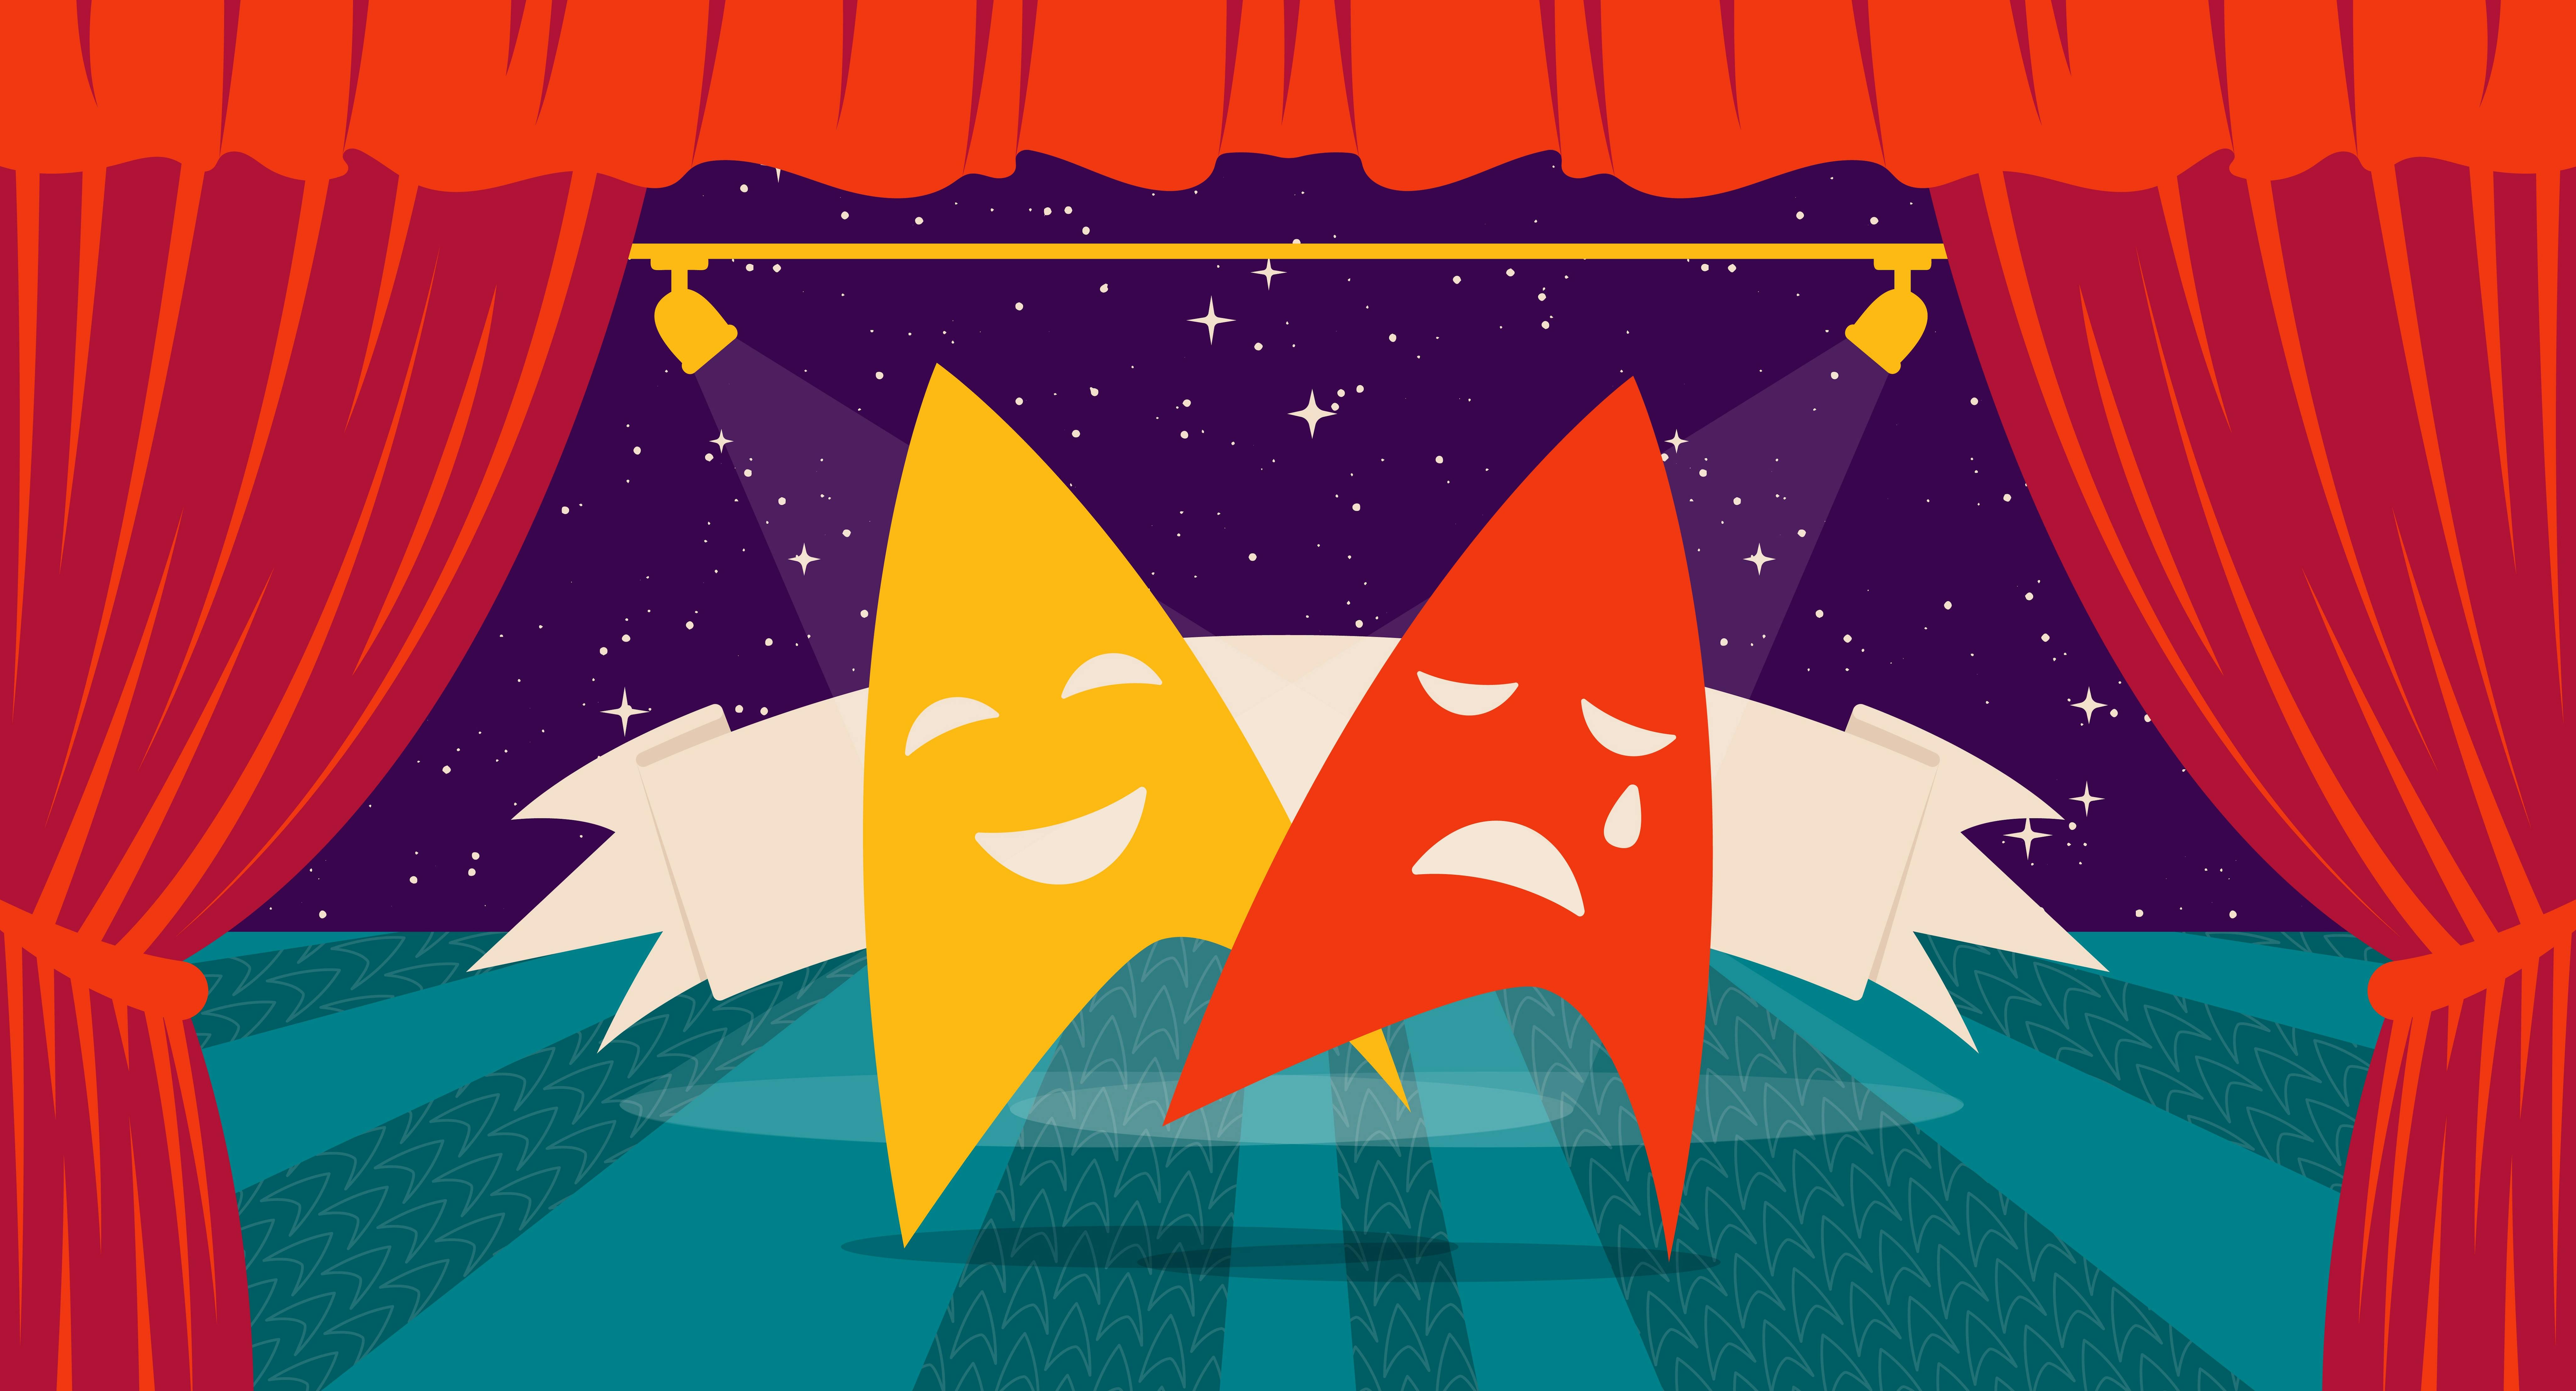 Two Starfleet deltas - one with a smiling face and the other with a sad face - stand center stage.